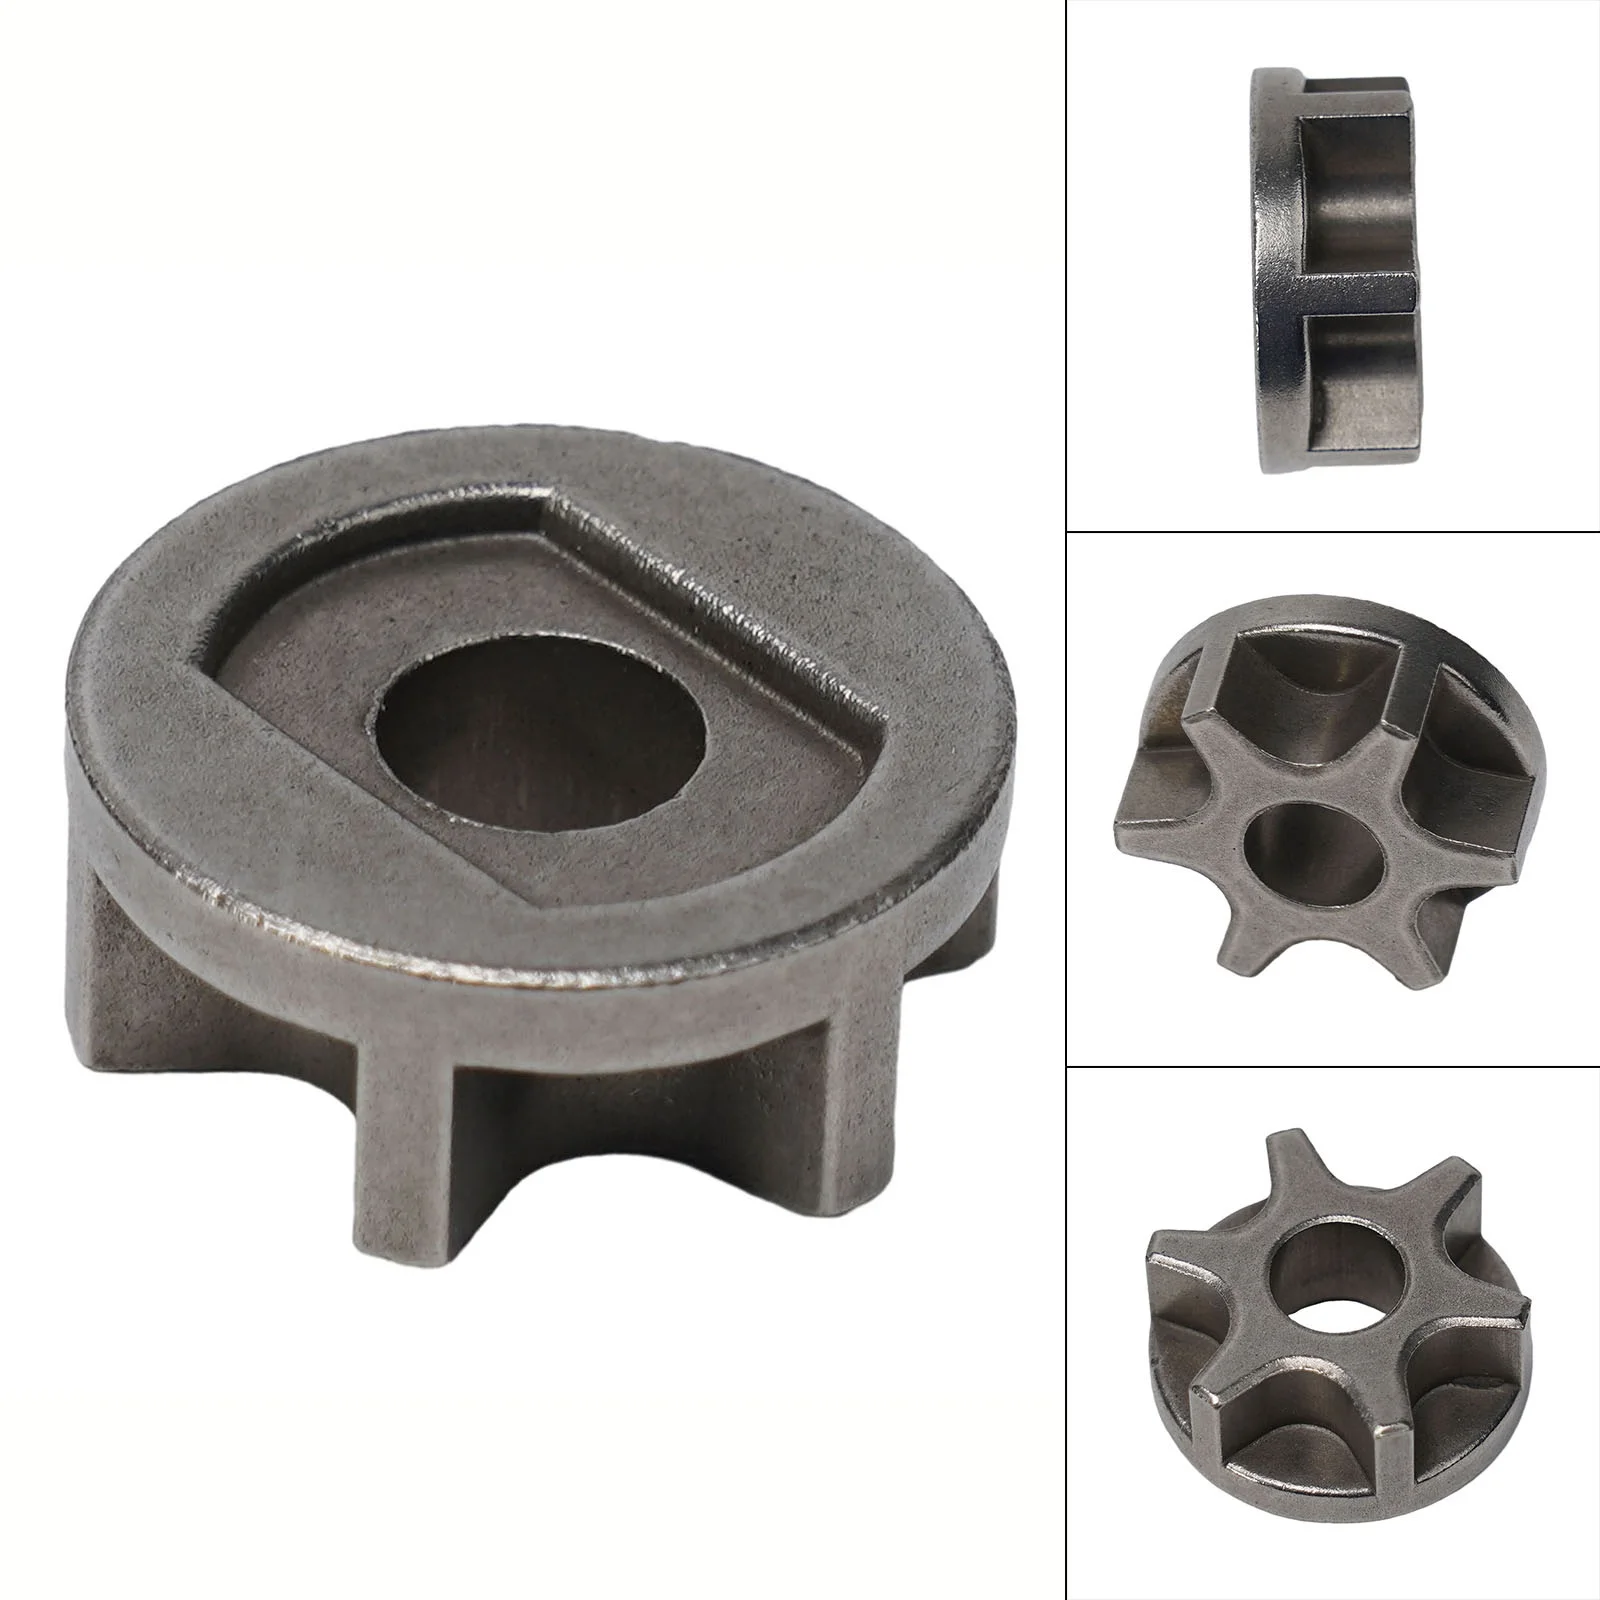 For M10-100 Angle Grinder Accessory Angle Grinder Gear Durable High Speed Steel Chain Saw M10 M14 M16 High Quality angle grinder nut silver stainless steel hexagon nut pressure plate durable and anti slip for 100 type angle grinder